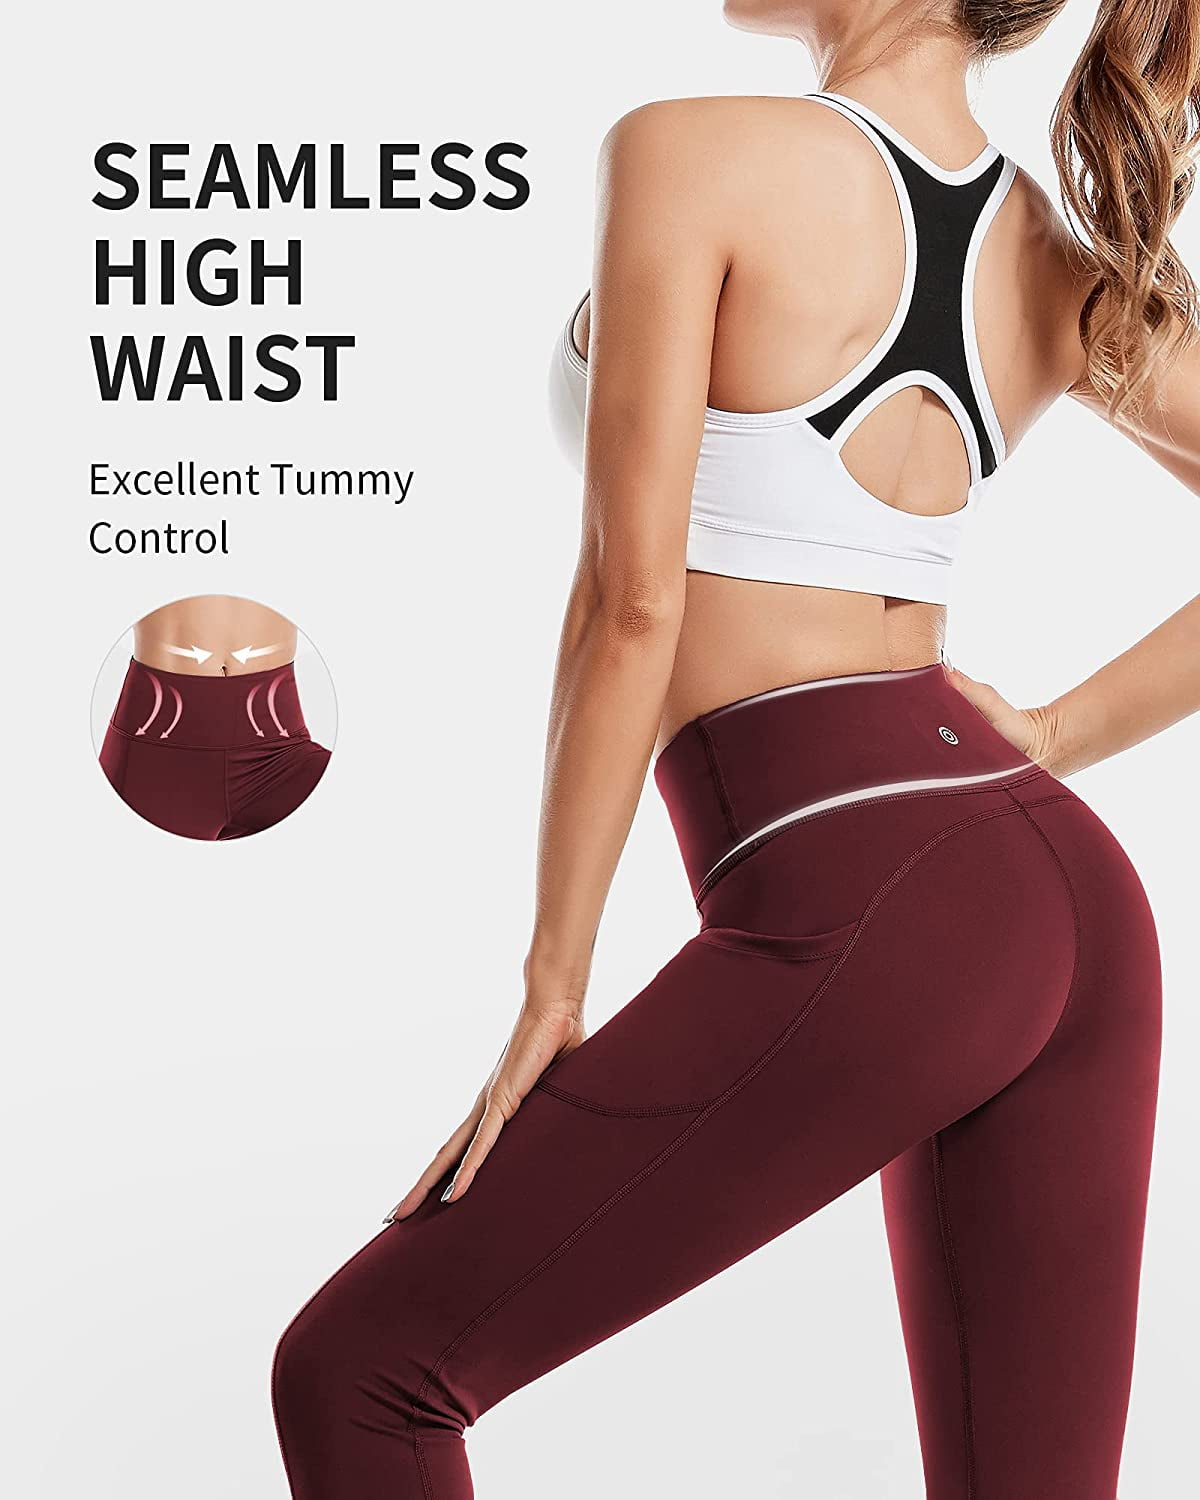 CAMBIVO YOGA PANTS for Women, Gym Leggings Workout Leggings with Pockets  £9.99 - PicClick UK